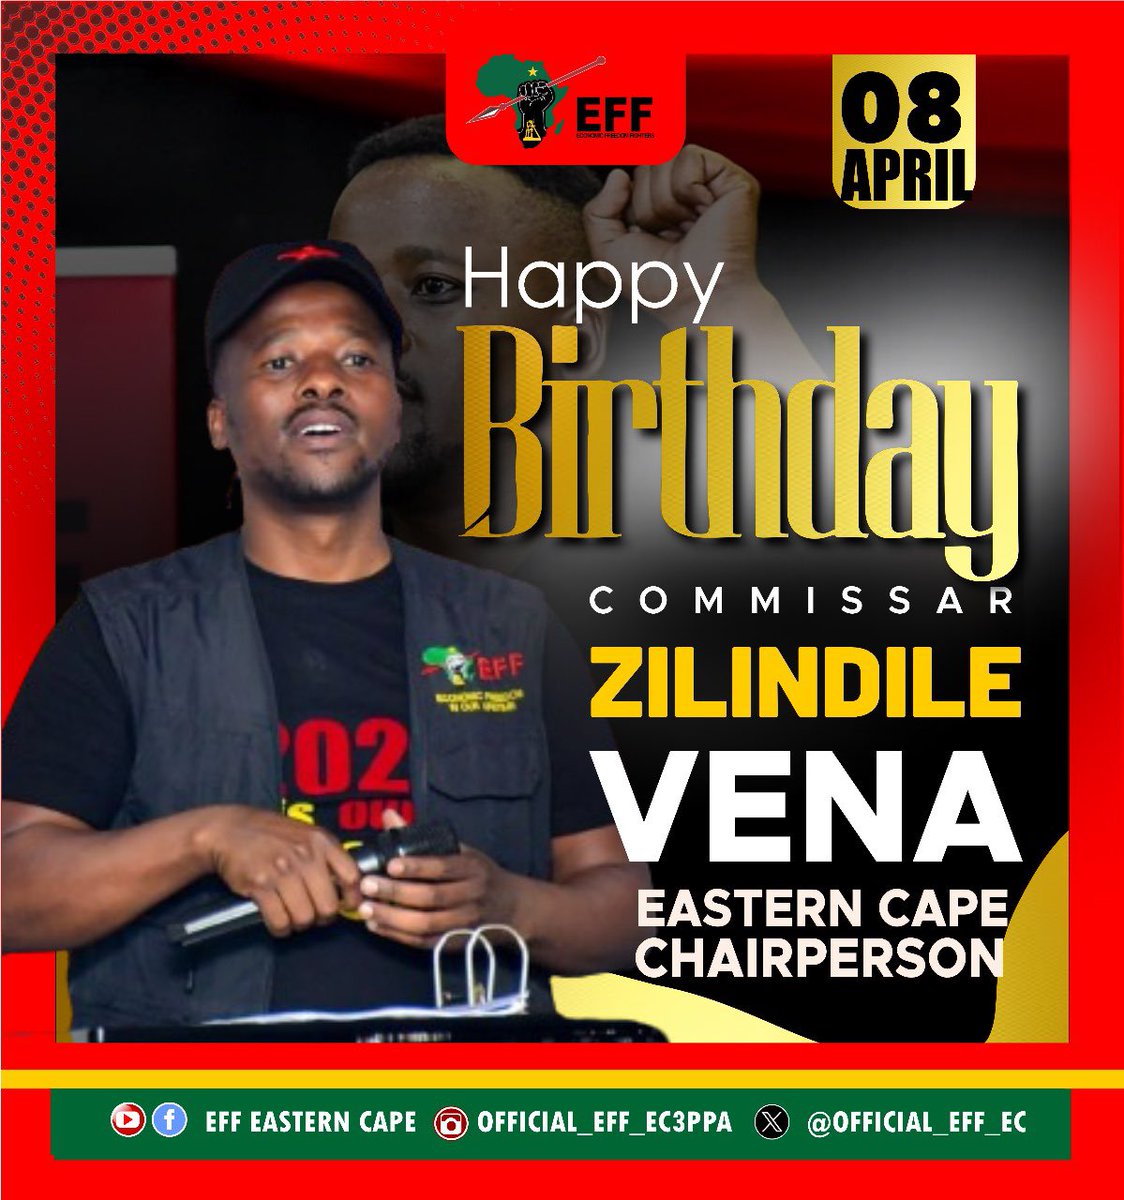 [BIRTHDAY ALERT]🎈🎈 The Economic Freedom Fighters Eastern Cape sends revolutionary birthday wishes to the Provincial Chairperson, Commissar Zilindile Vena. We wish you a long and fruitful life chairman. Imini emnandi Jambase 🎊✊🏾.